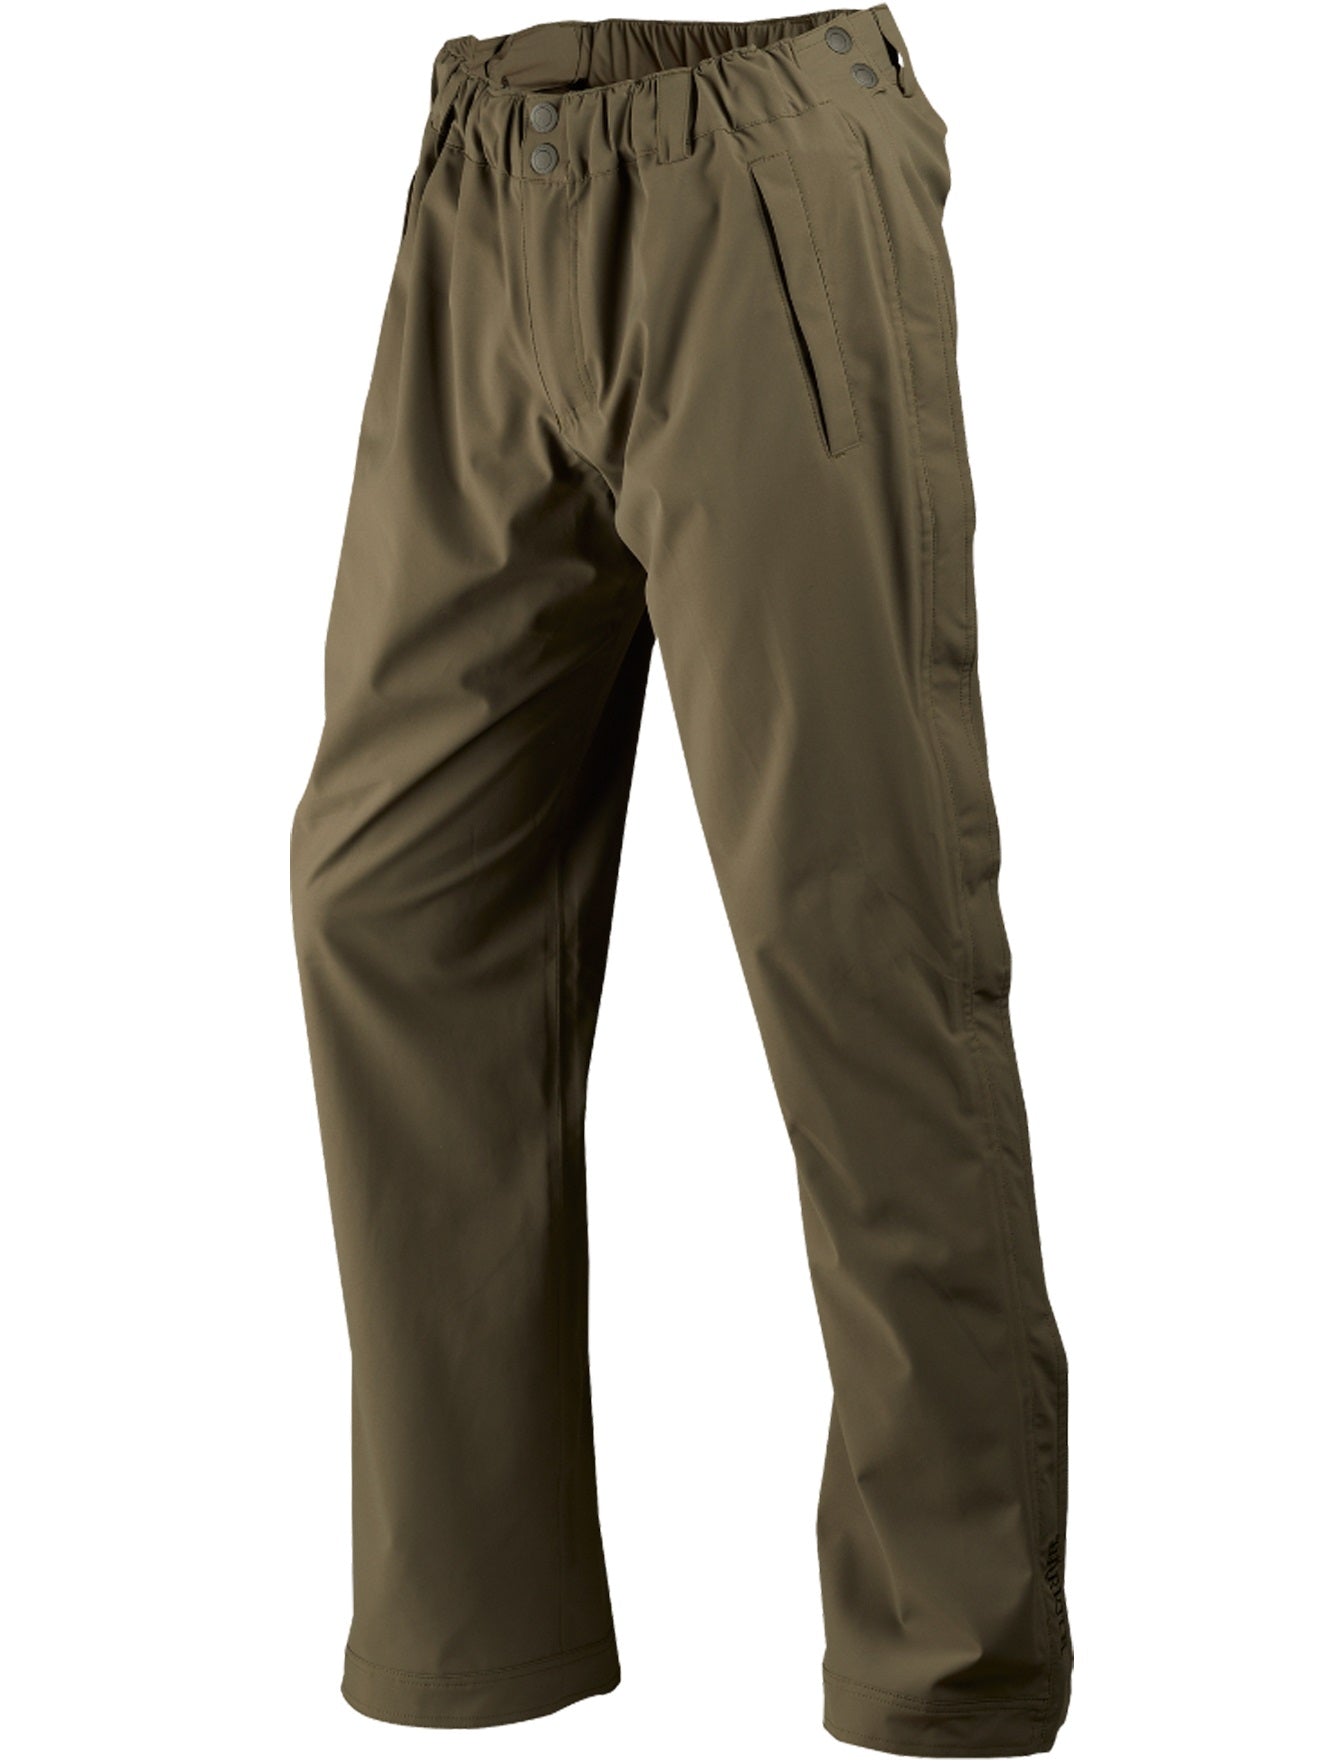 harkila orton overtrousers willow green 83108cad 262b 47df 8ef0 55b5518c2a38